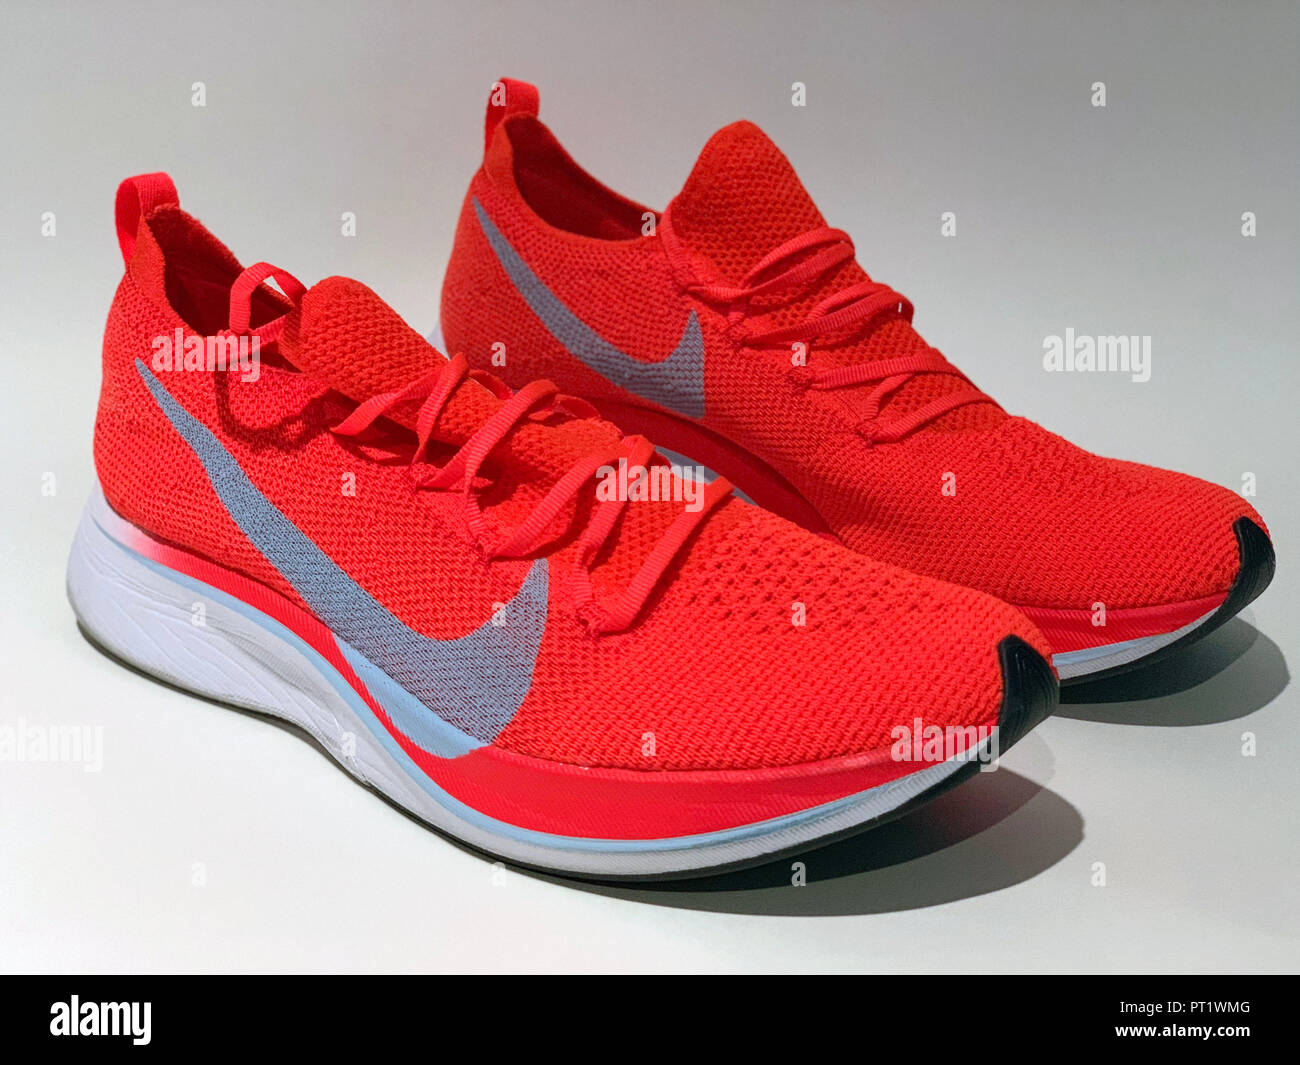 Los Angeles, United States. 05th Oct, 2018. Detailed view of the Nike  VaporFly 4% Flyknit running shoe released on Thursday, Oct.4, 2018. The  racing flat features an ultra-light, uber-responsive ZoomX foam and